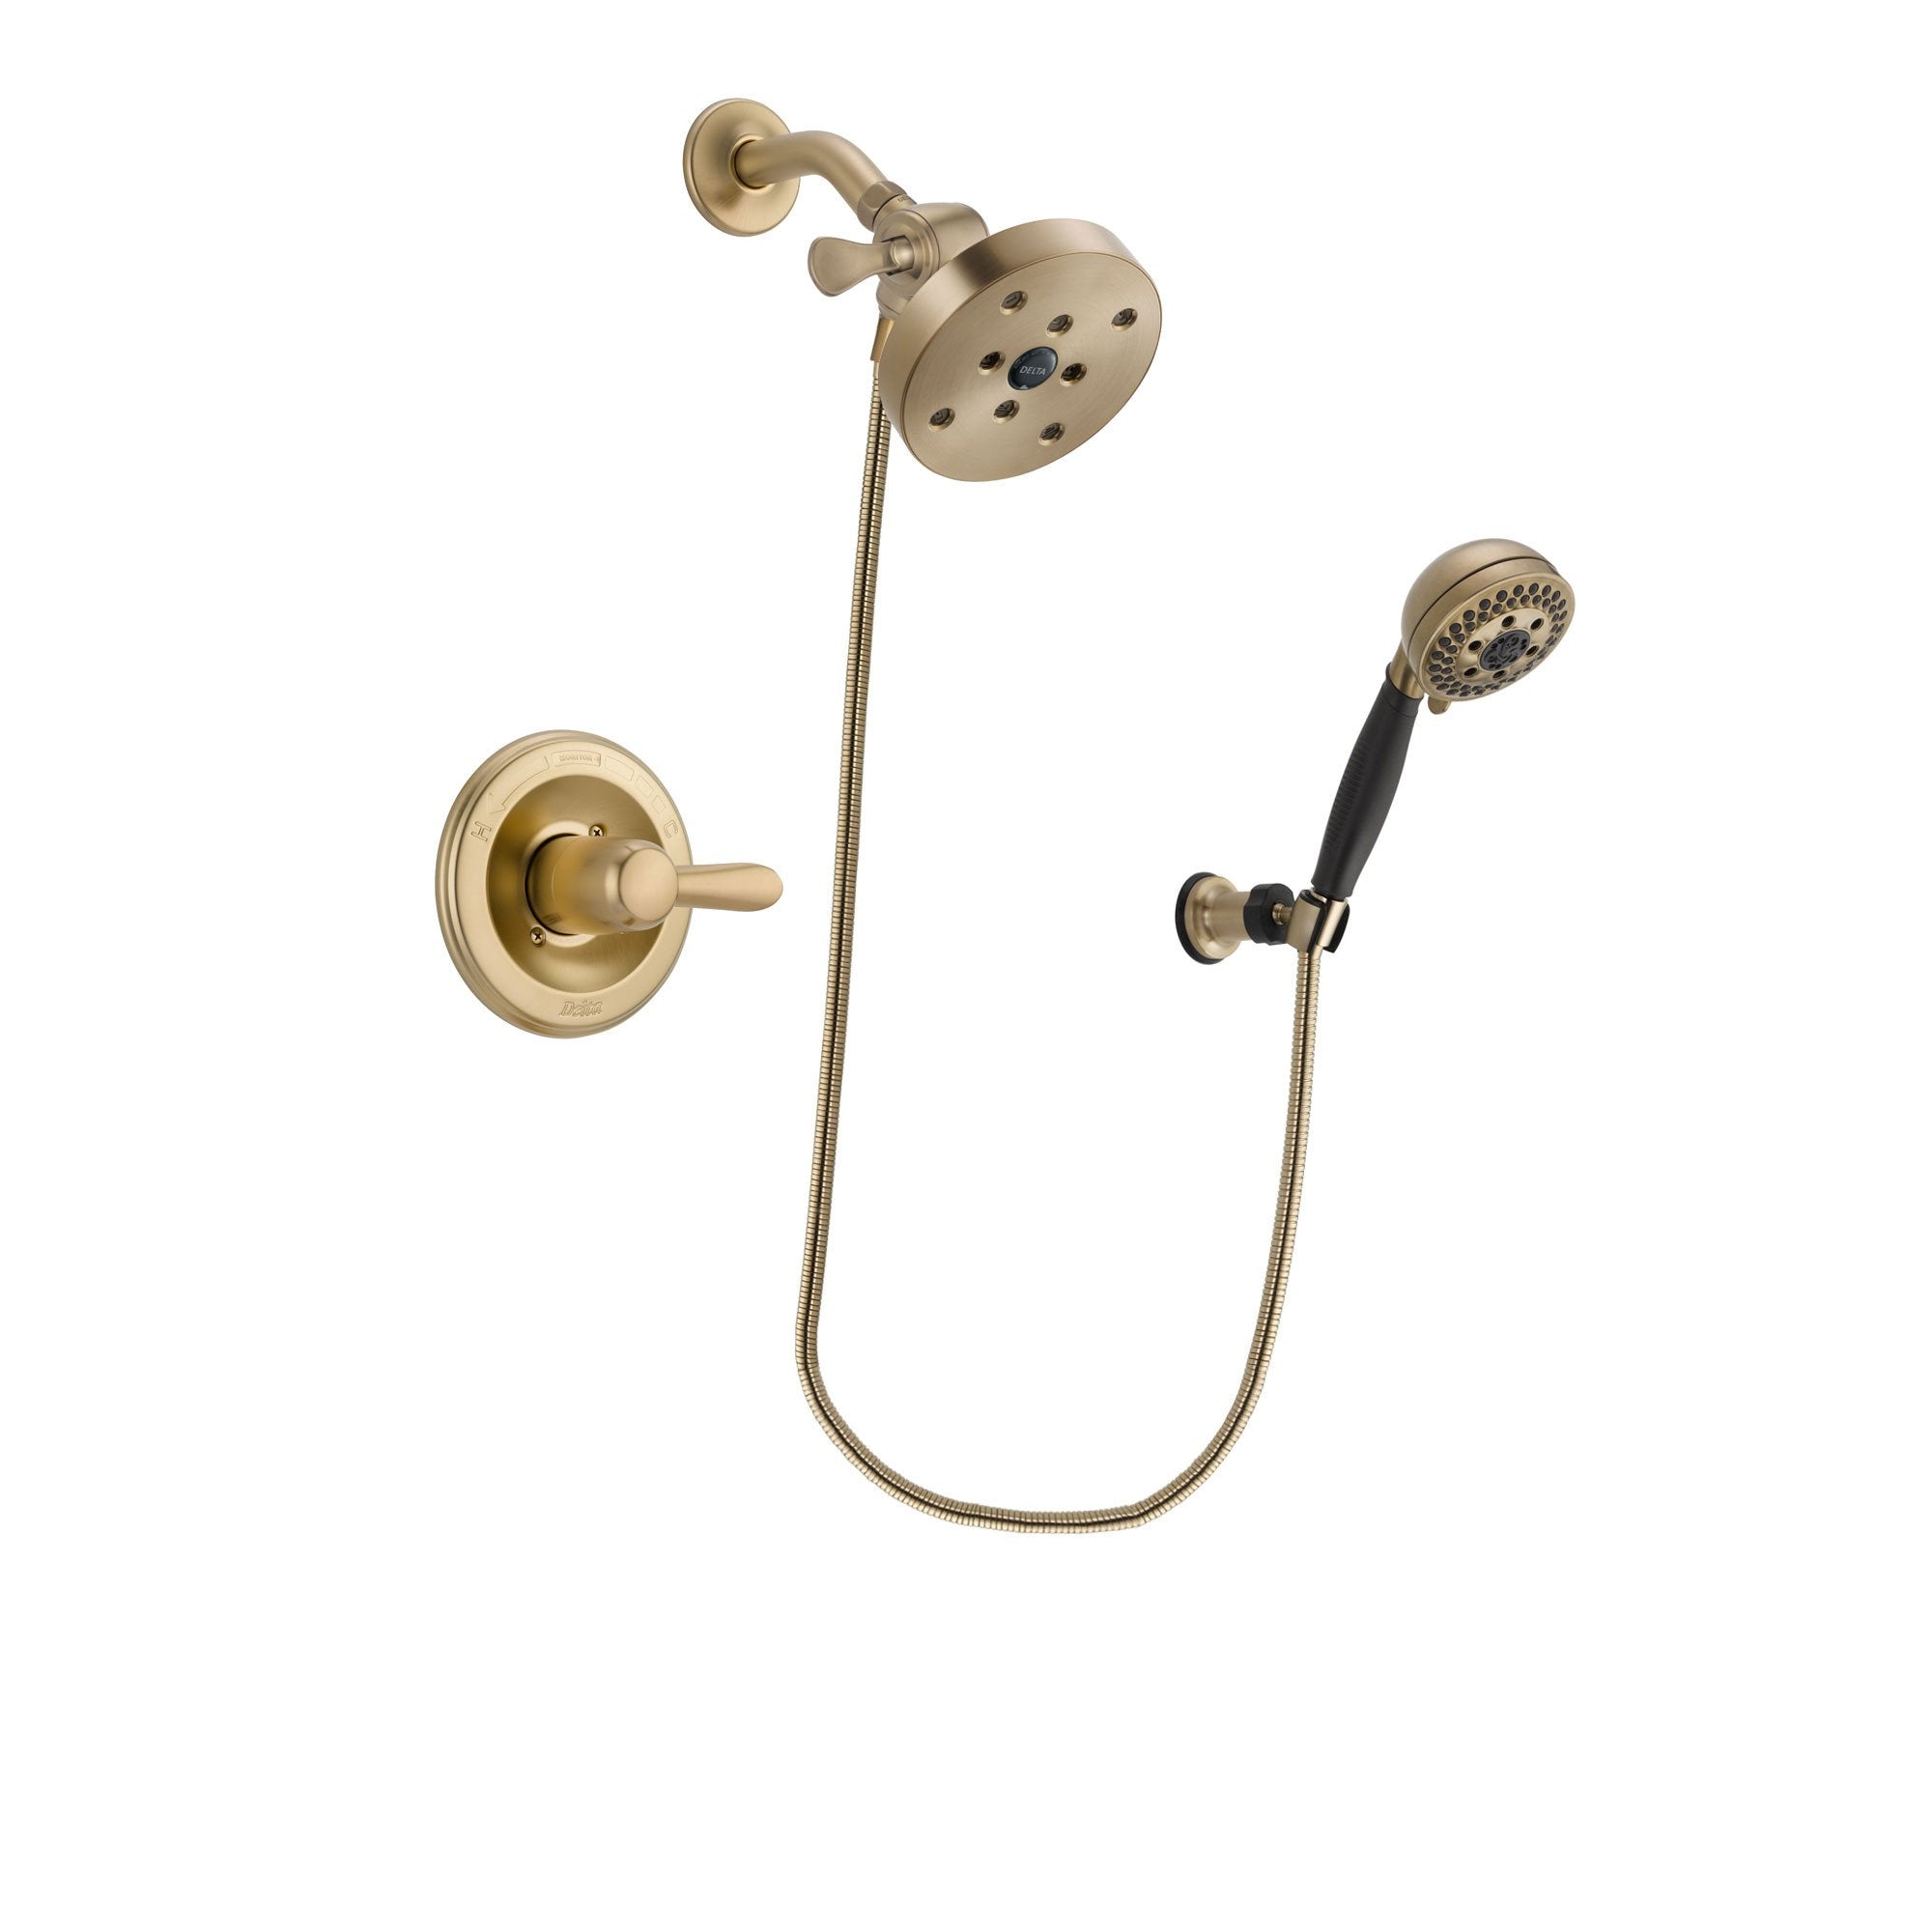 Delta Lahara Champagne Bronze Finish Shower Faucet System Package with 5-1/2 inch Showerhead and 5-Spray Wall Mount Hand Shower Includes Rough-in Valve DSP3820V